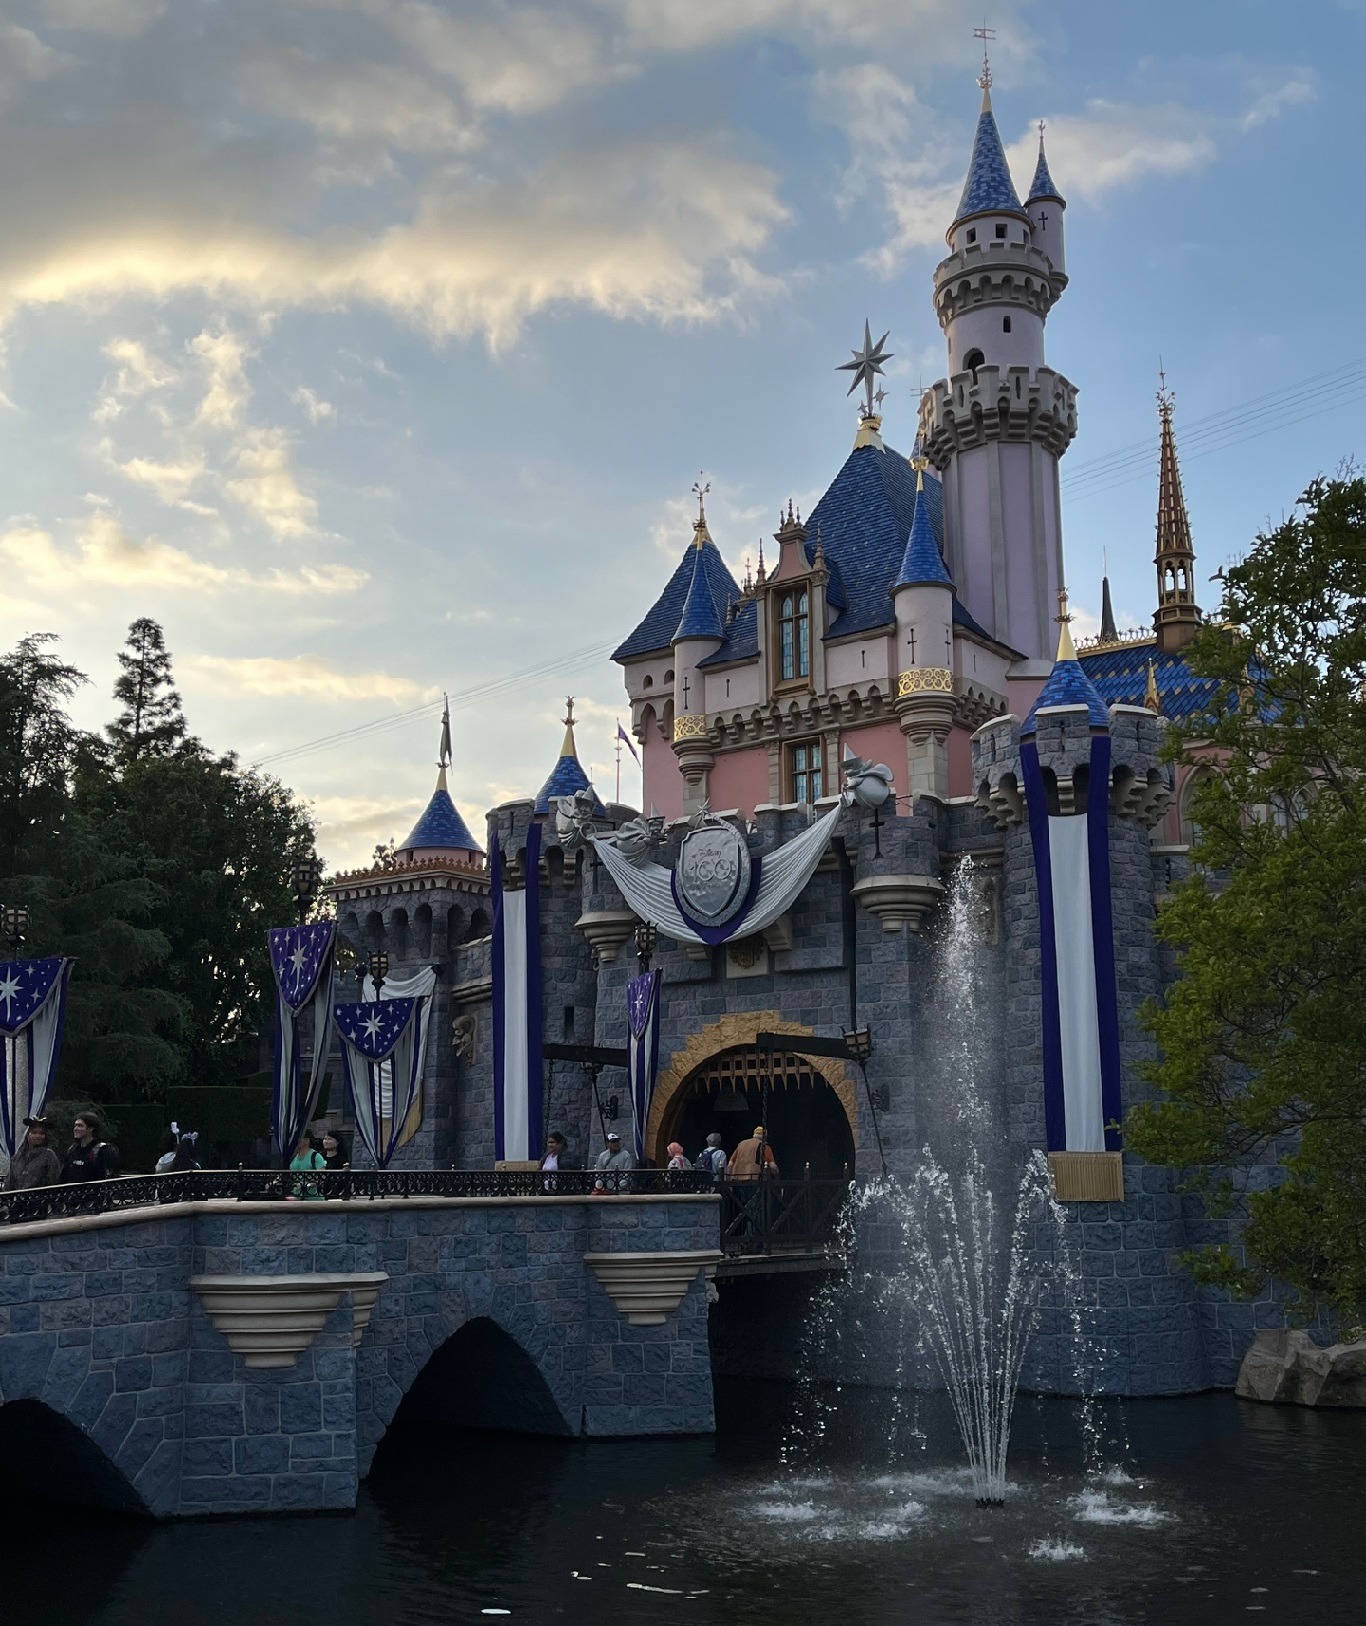 Disneyland Ticket Prices Increase along with Genie+ and Parking